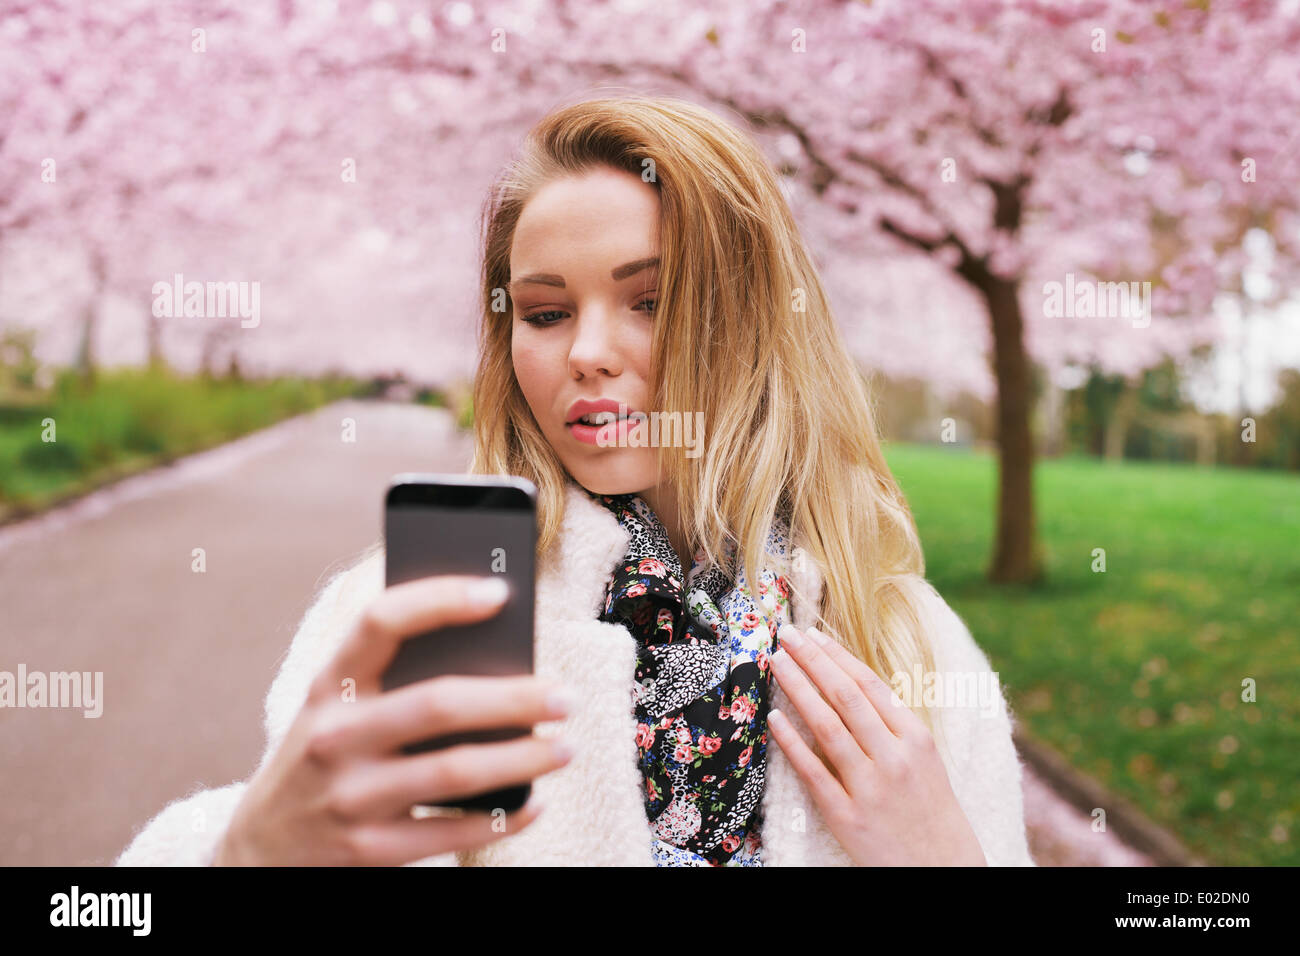 Attractive woman photographing herself at the spring garden. Beautiful young female model taking self portrait with her phone. Stock Photo